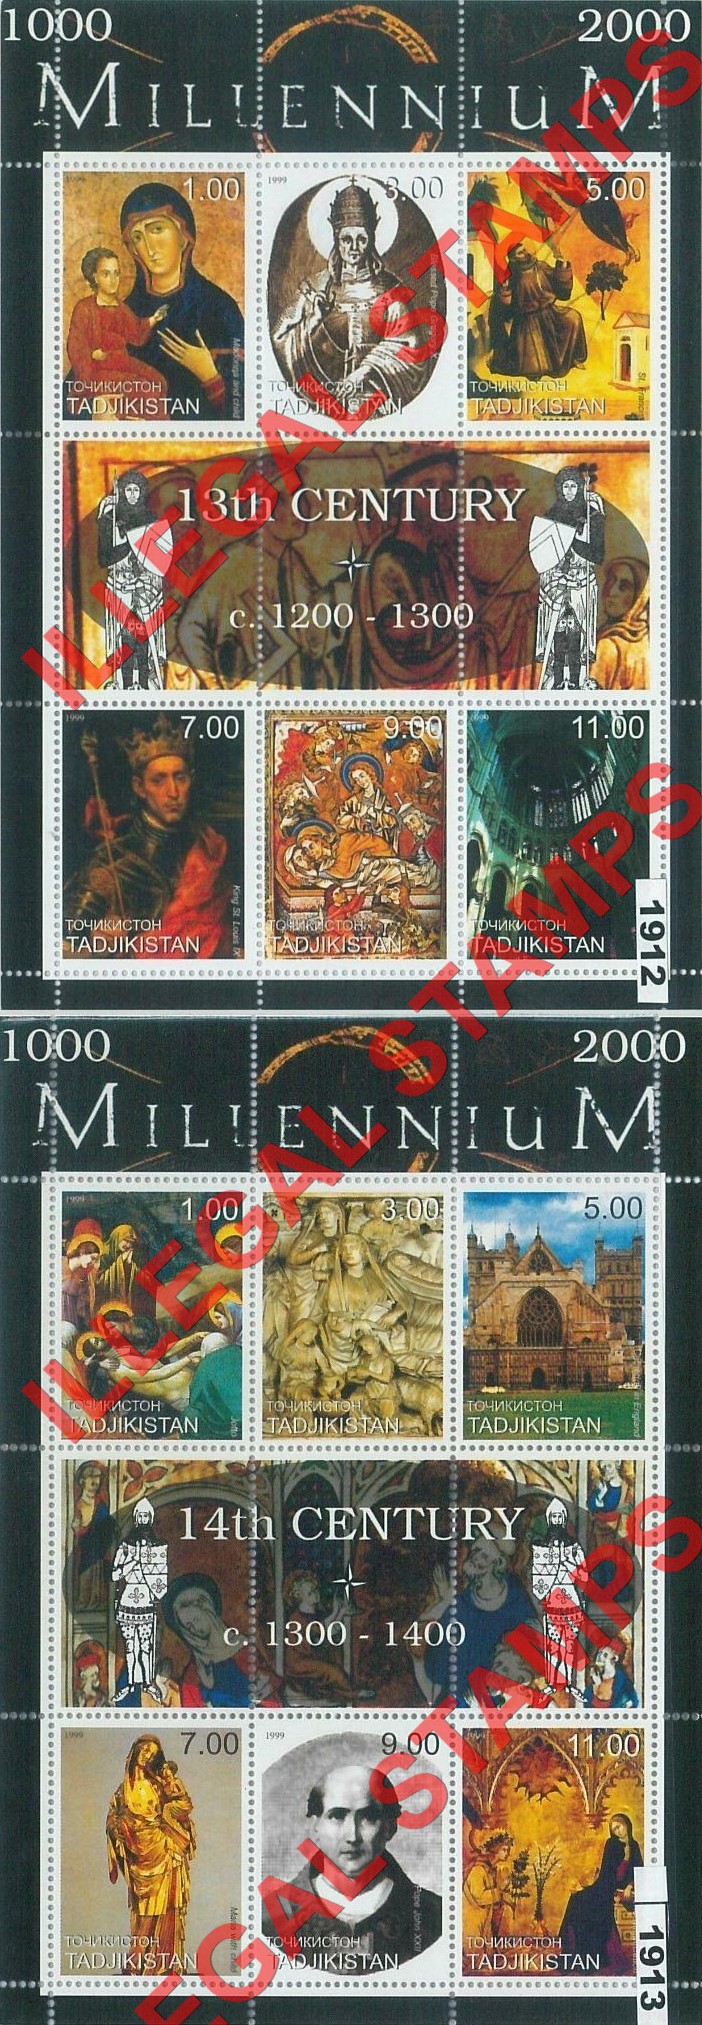 Tajikistan 1999 Millennium 13th and 14th Century Illegal Stamp Souvenir Sheets of 9